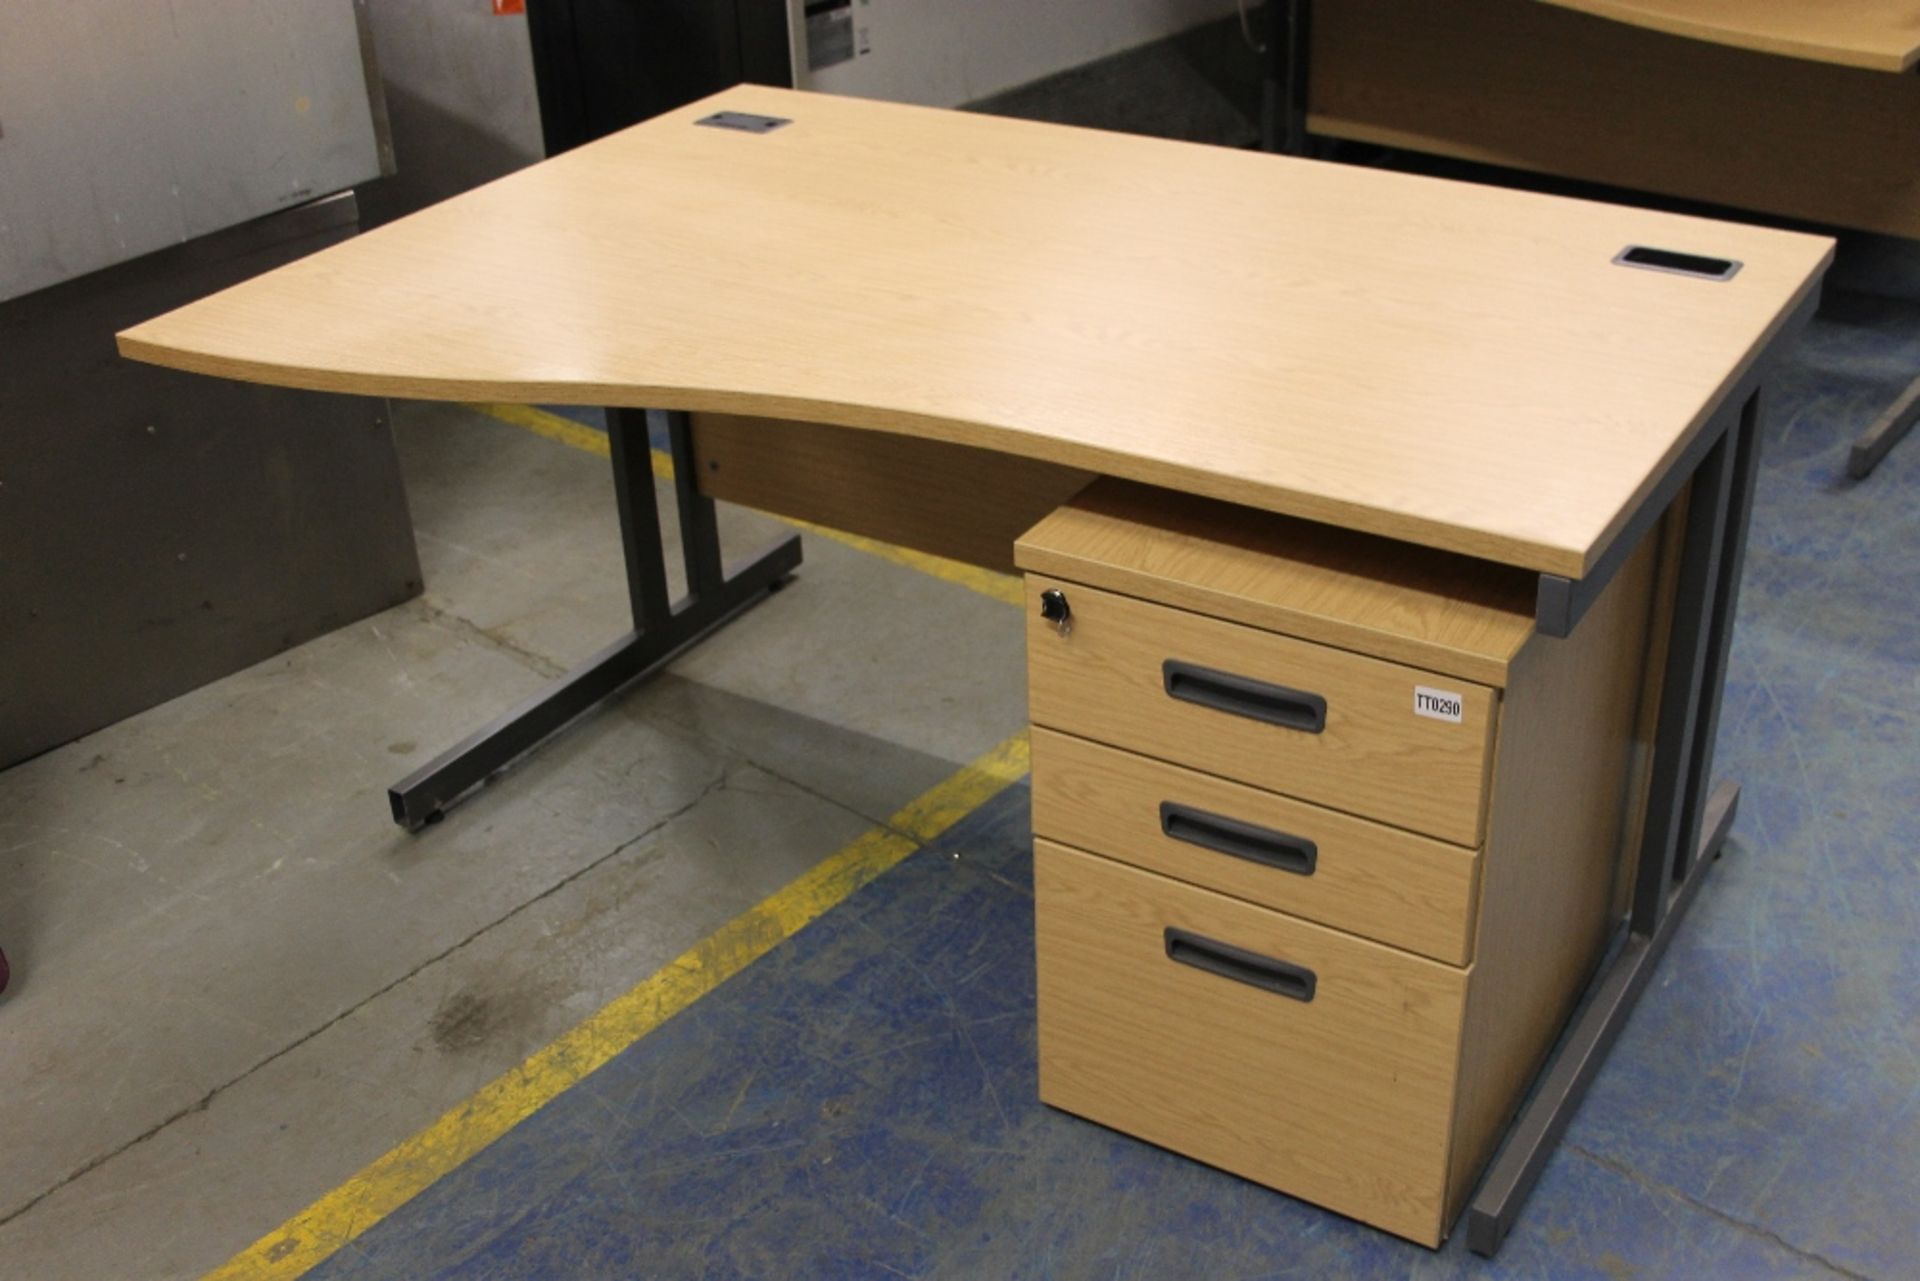 Matching Office Set in Light Wood Office Desk + Set 3 Drawers – Nice condition W140cm x H80cm x - Image 2 of 2